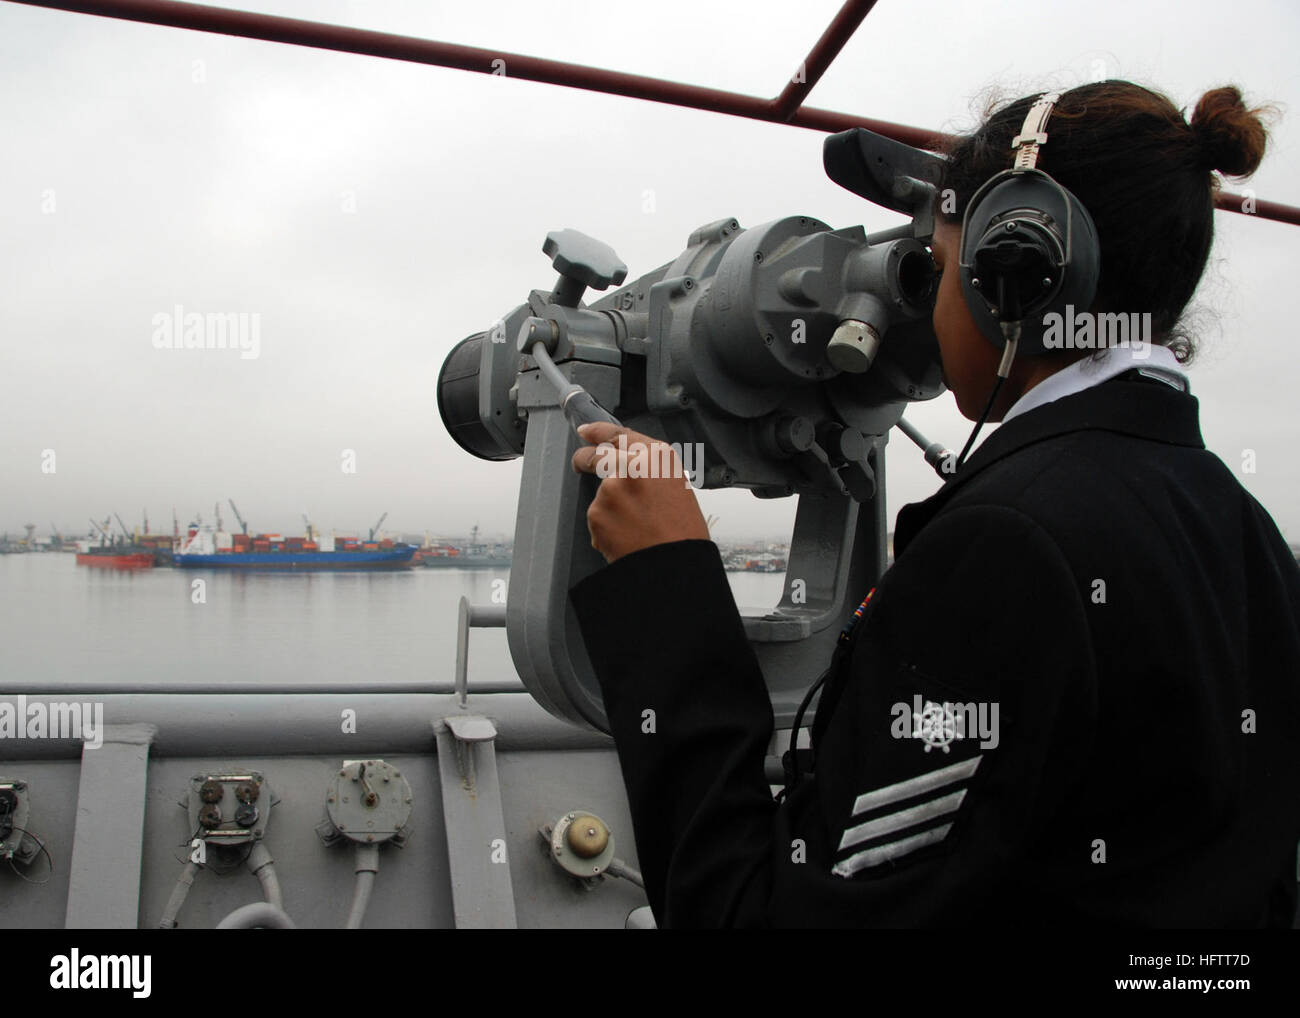 070702-N-4021H-018 CALLAO, Peru (July 2, 2007) - Quartermaster Seaman Salome Jeronimo looks through the big eyes while USS Pearl Harbor (LSD 52) moors in Peru during Partnership of the Americas (POA) 2007. POA is focusing on enhancing relationships with partner nations through a variety of exercises and events at sea and on shore throughout Latin America and the Caribbean. U.S. Navy photo by Mass Communication Specialist 3rd Class Damien Horvath (RELEASED) US Navy 070702-N-4021H-018 Quartermaster Seaman Salome Jeronimo looks through the big eyes while USS Pearl Harbor (LSD 52) moors in Peru du Stock Photo